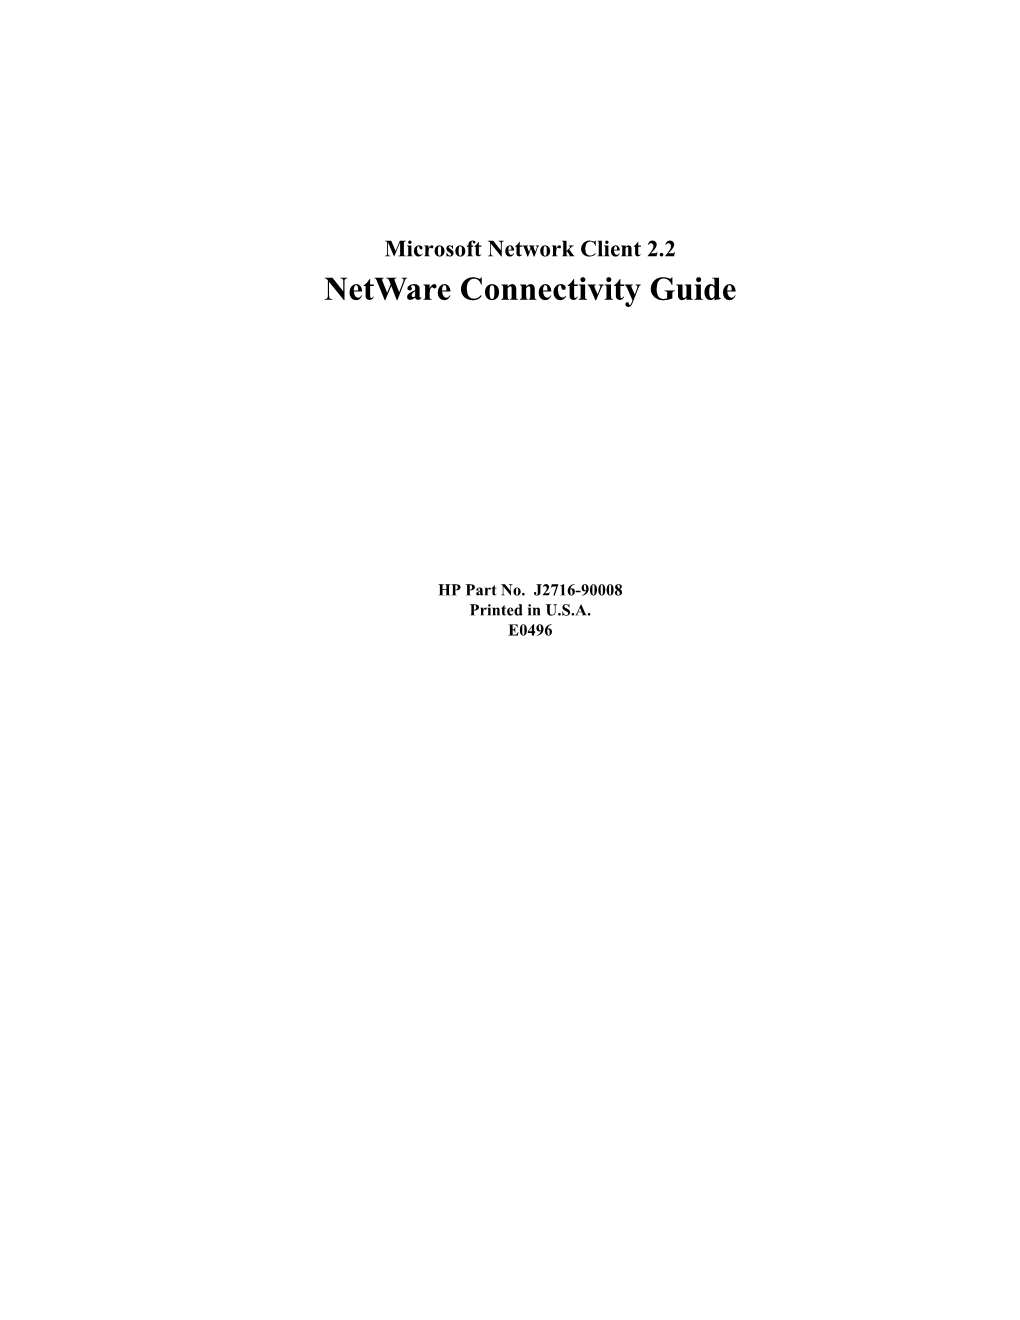 Netware Connectivity Guide